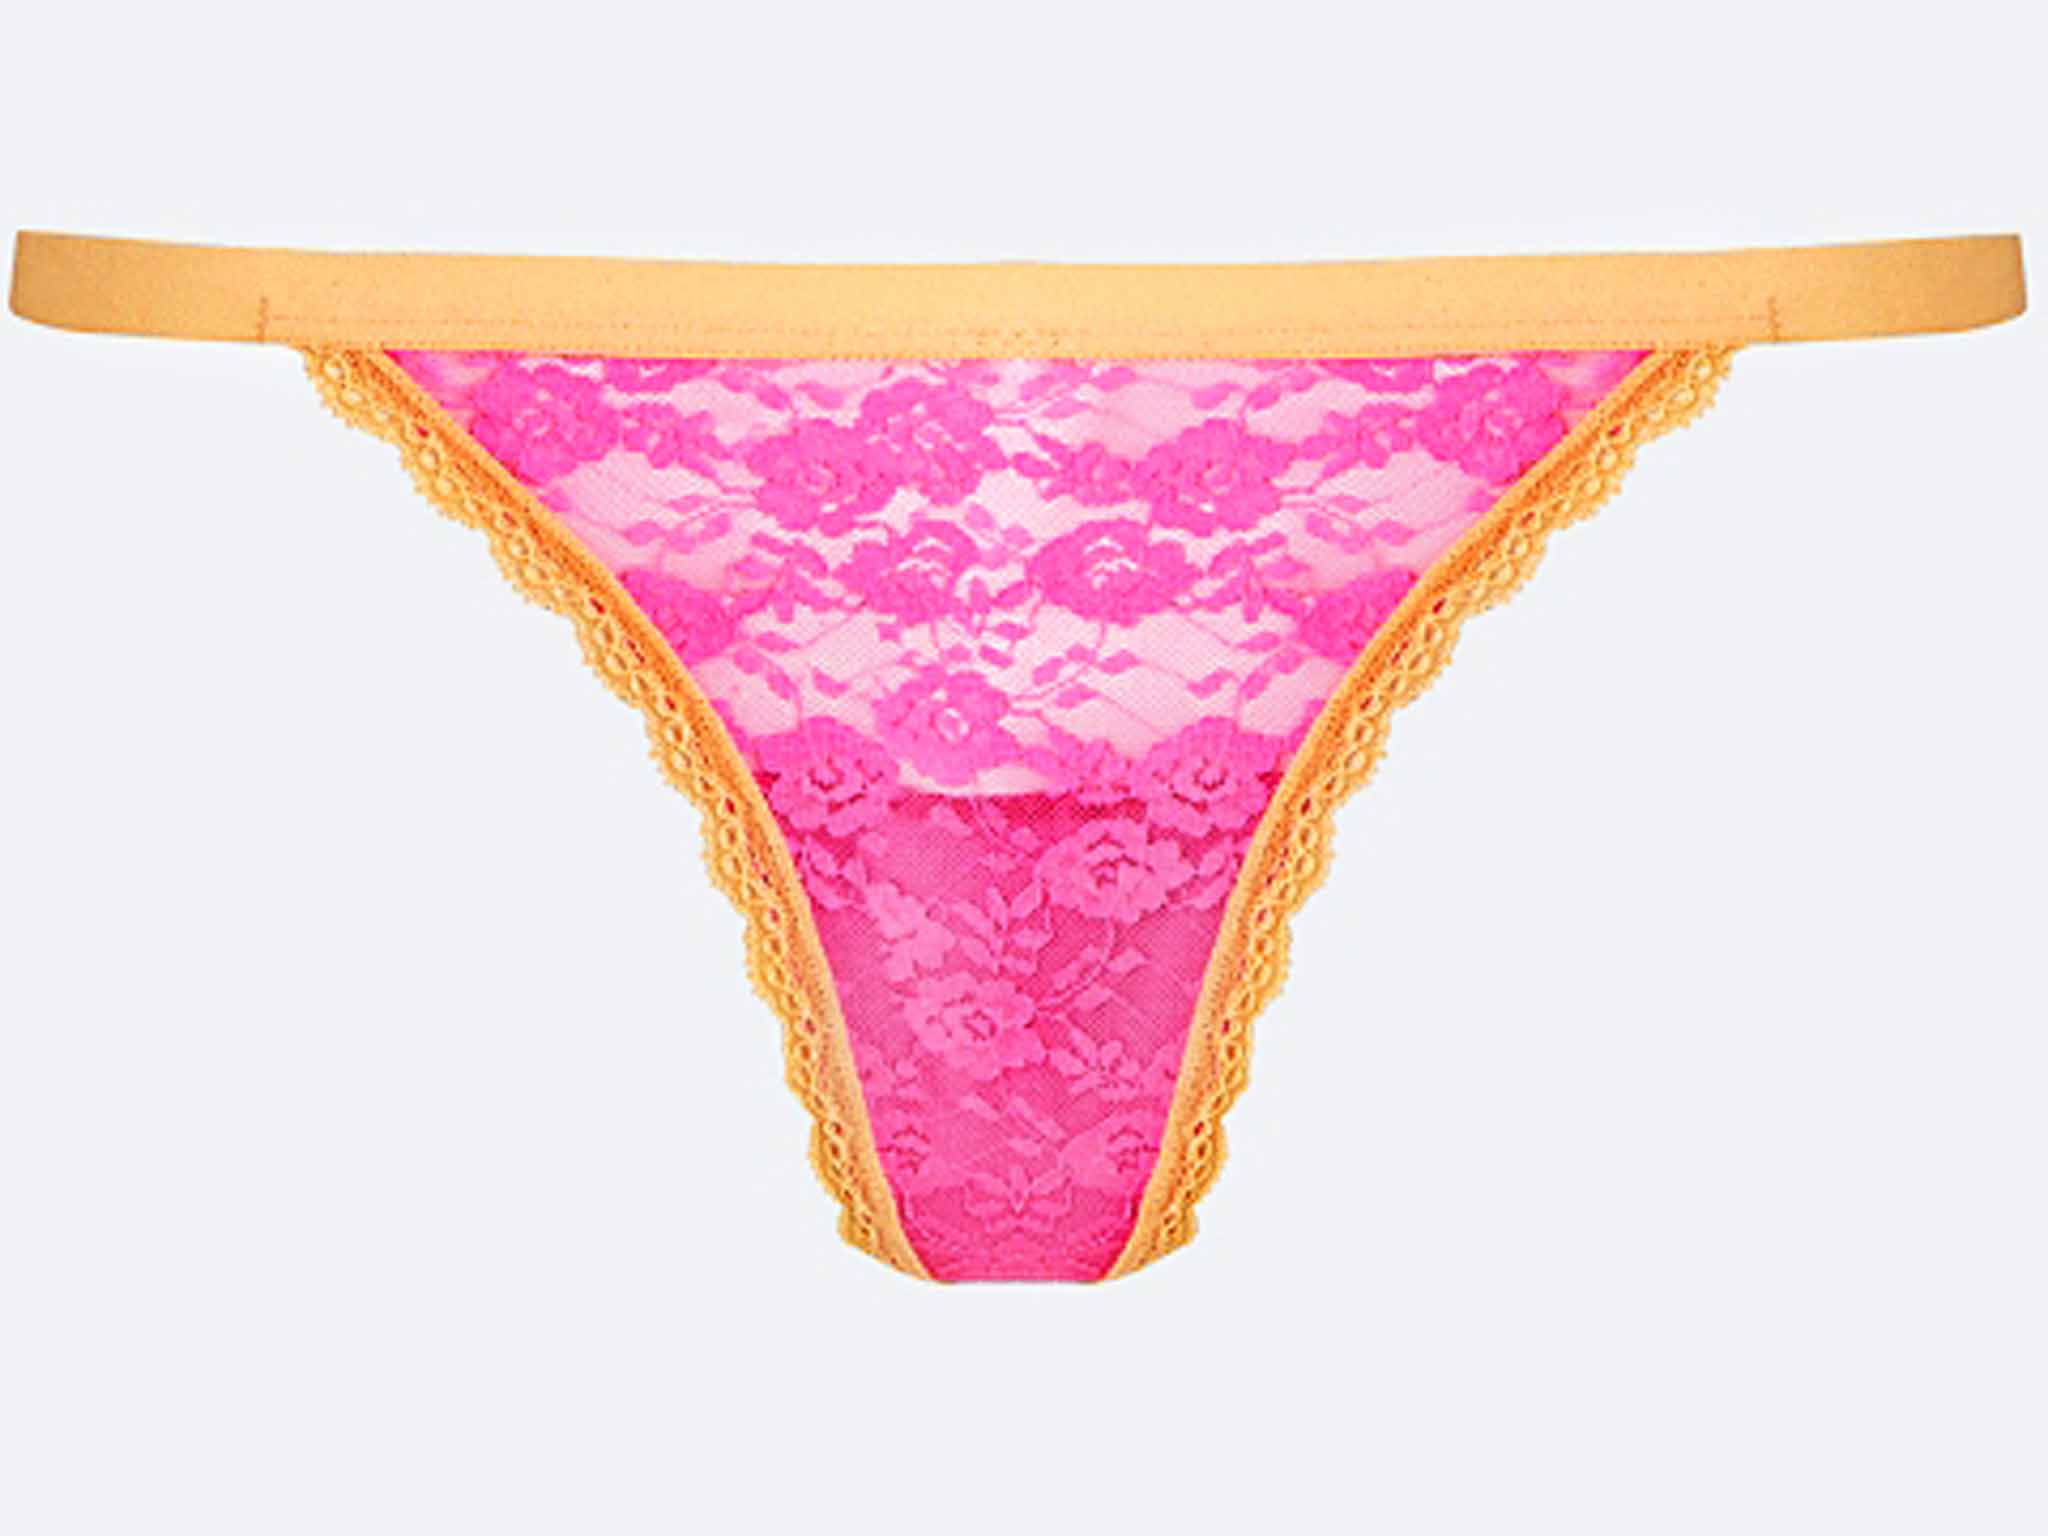 Big knickers are back: Thongs ain't what they used to be, The Independent